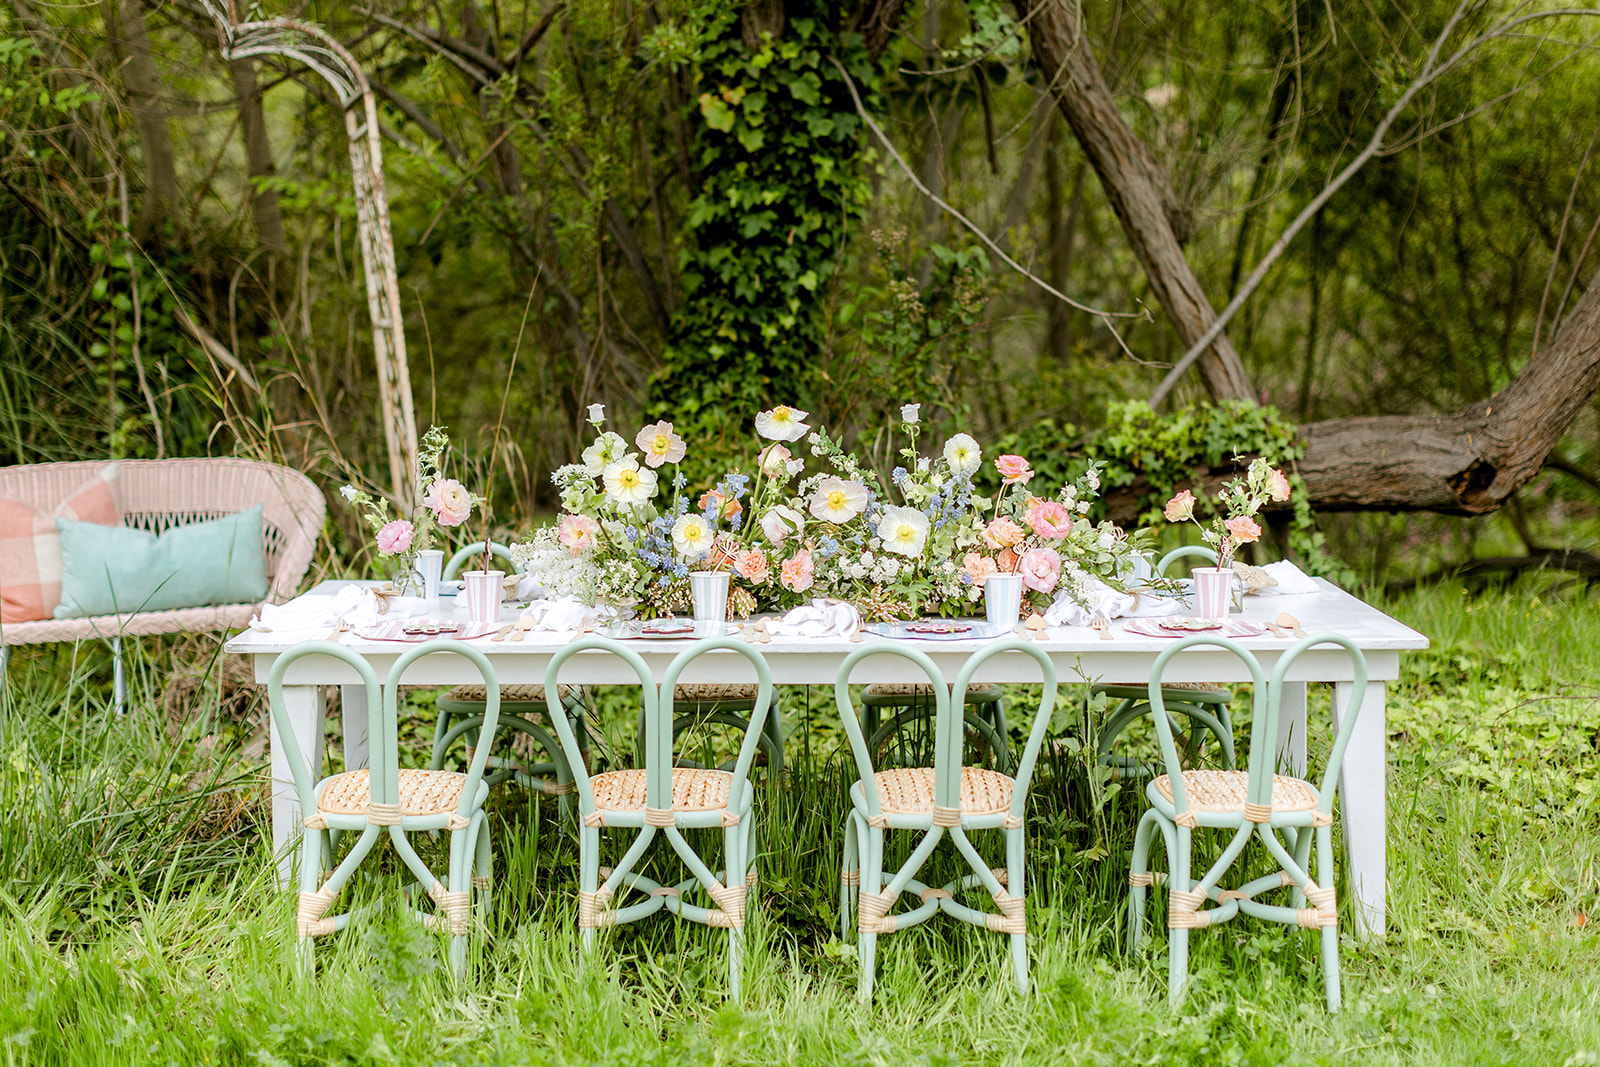 An Elegant and Ethereal Outdoor Easter Party